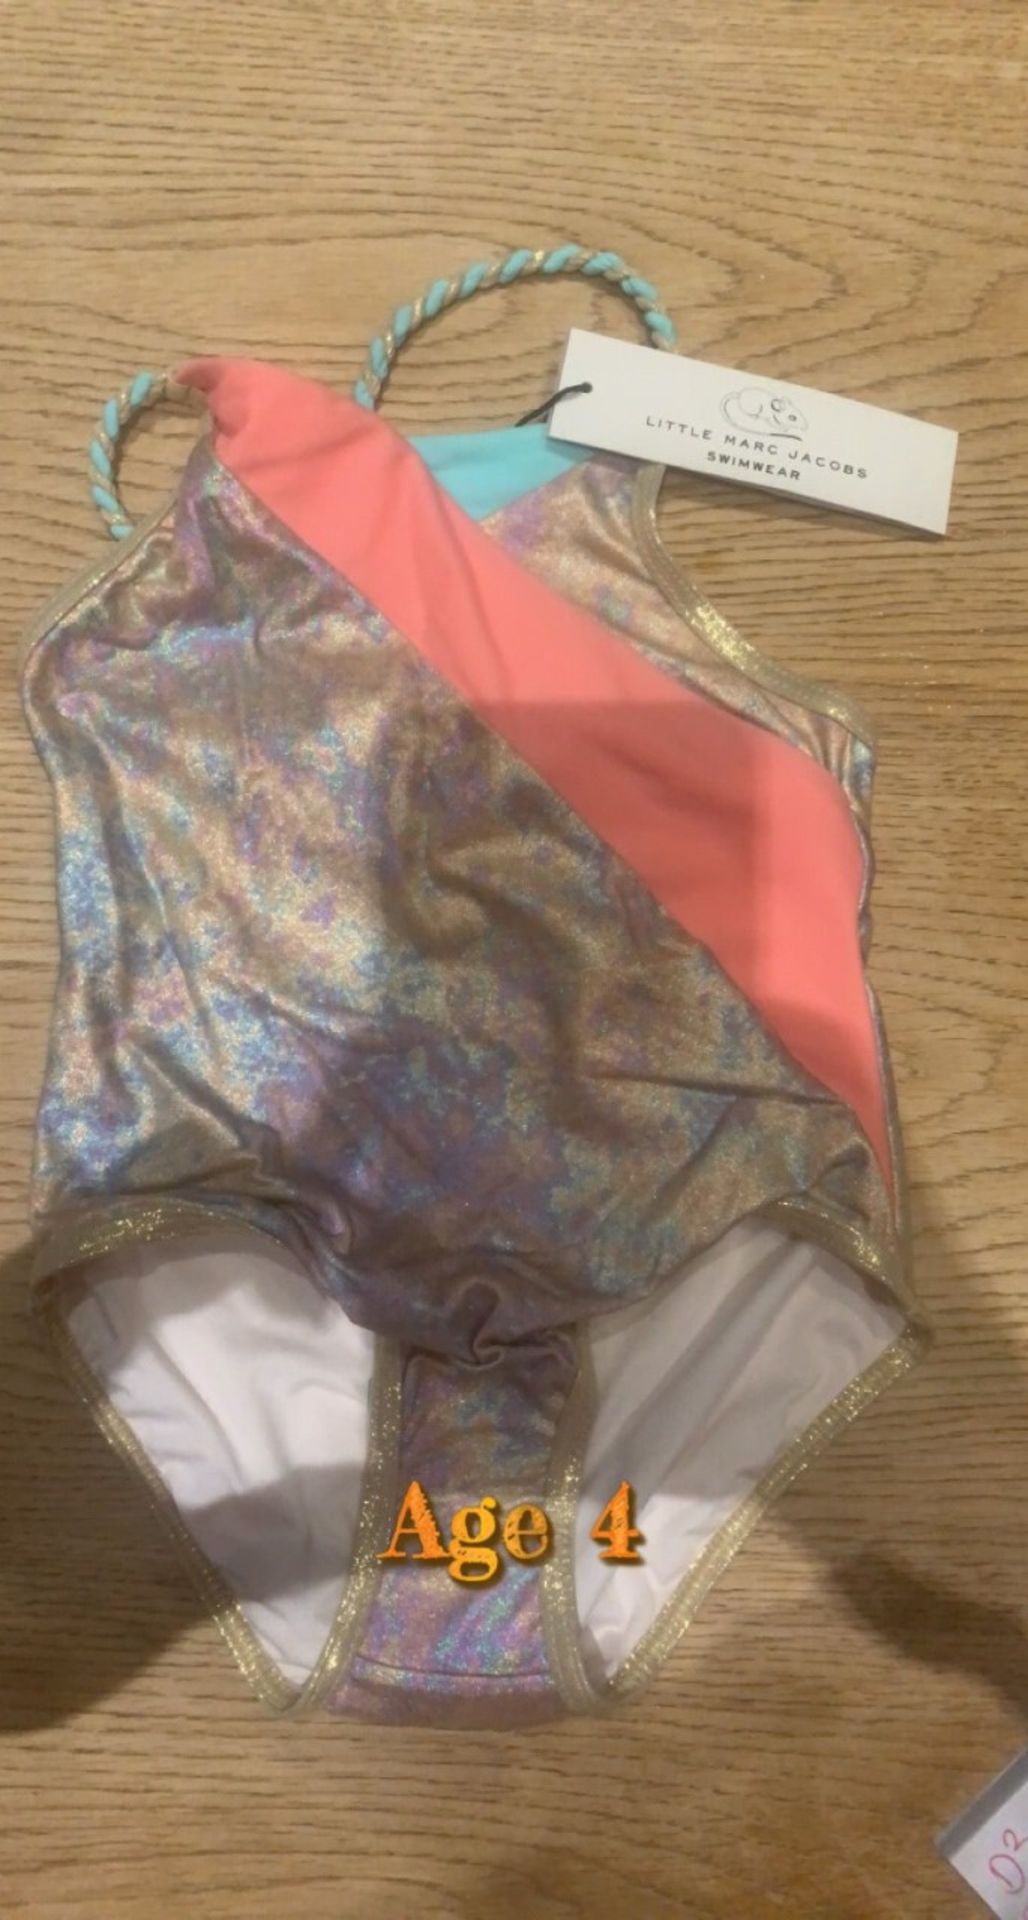 LITTLE MARC JACOBS SWIMMING COSTUME AGE 4 BRAND NEW WITH TAGS